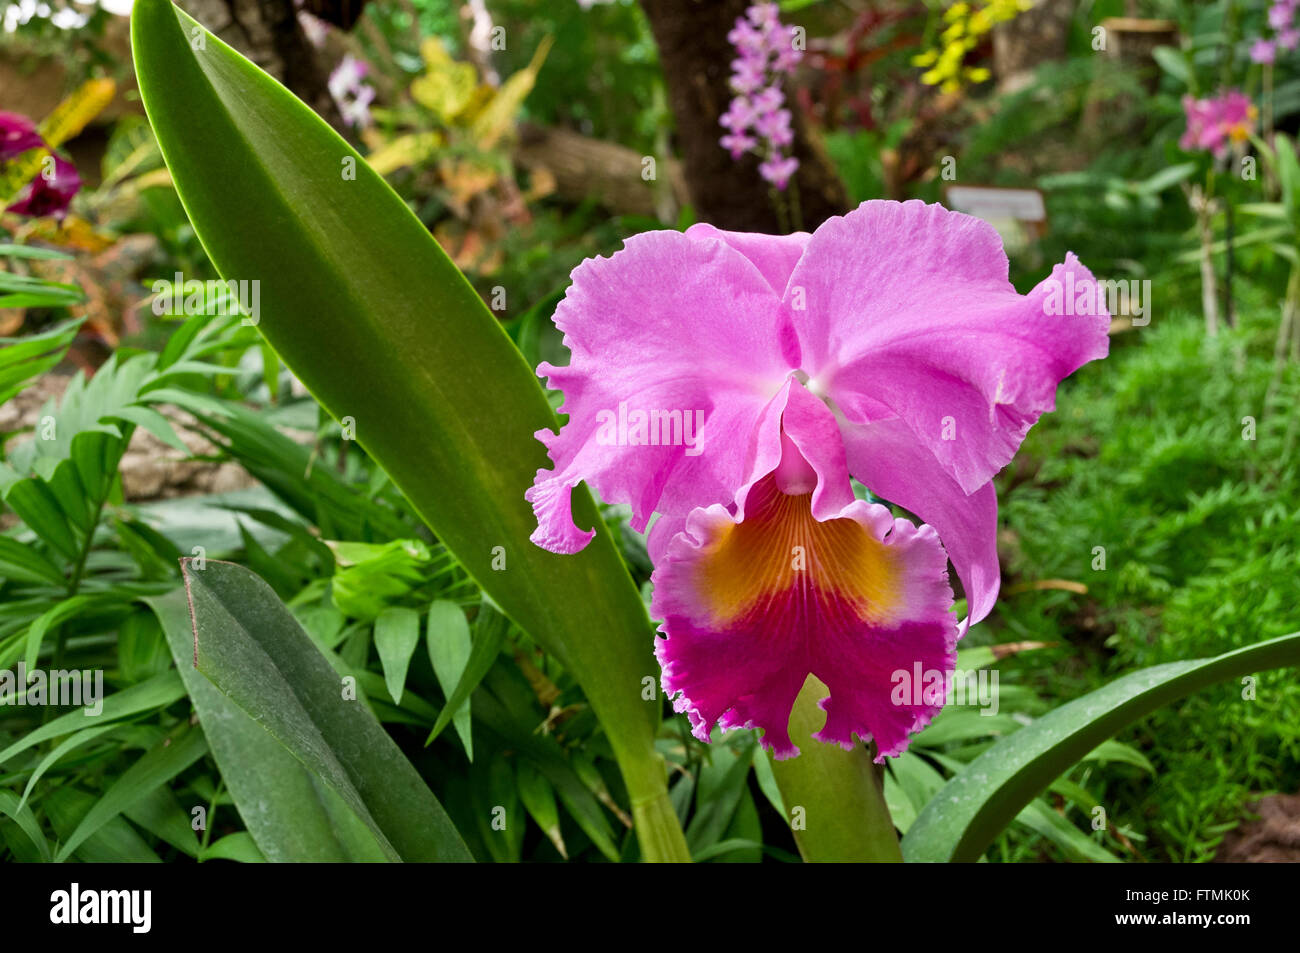 Perfect single pink 'Cattleya' type orchid head in lush tropical environment Stock Photo